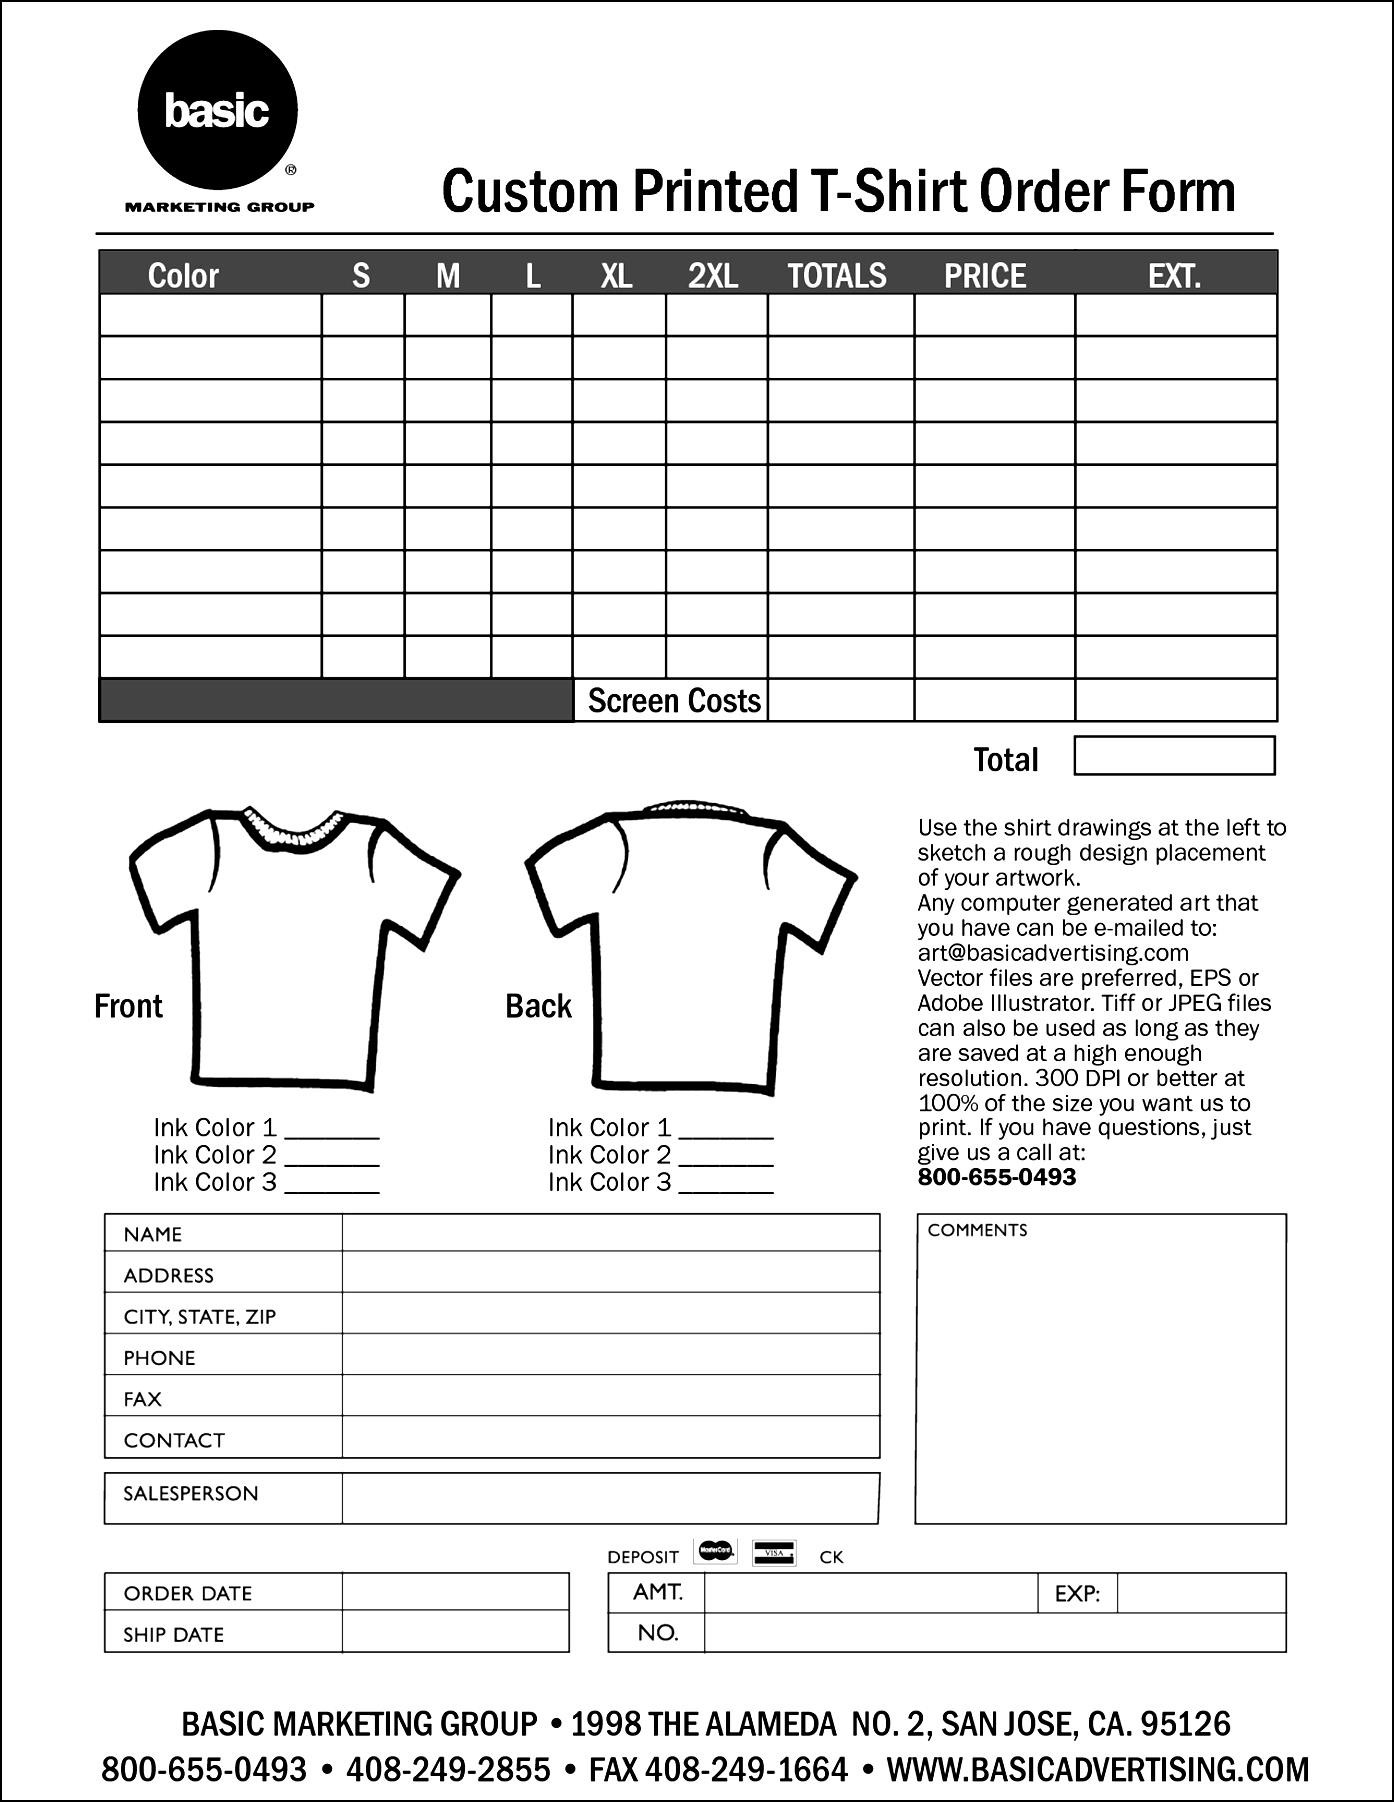 Change Order Form Template | Harley Special Free Printable 